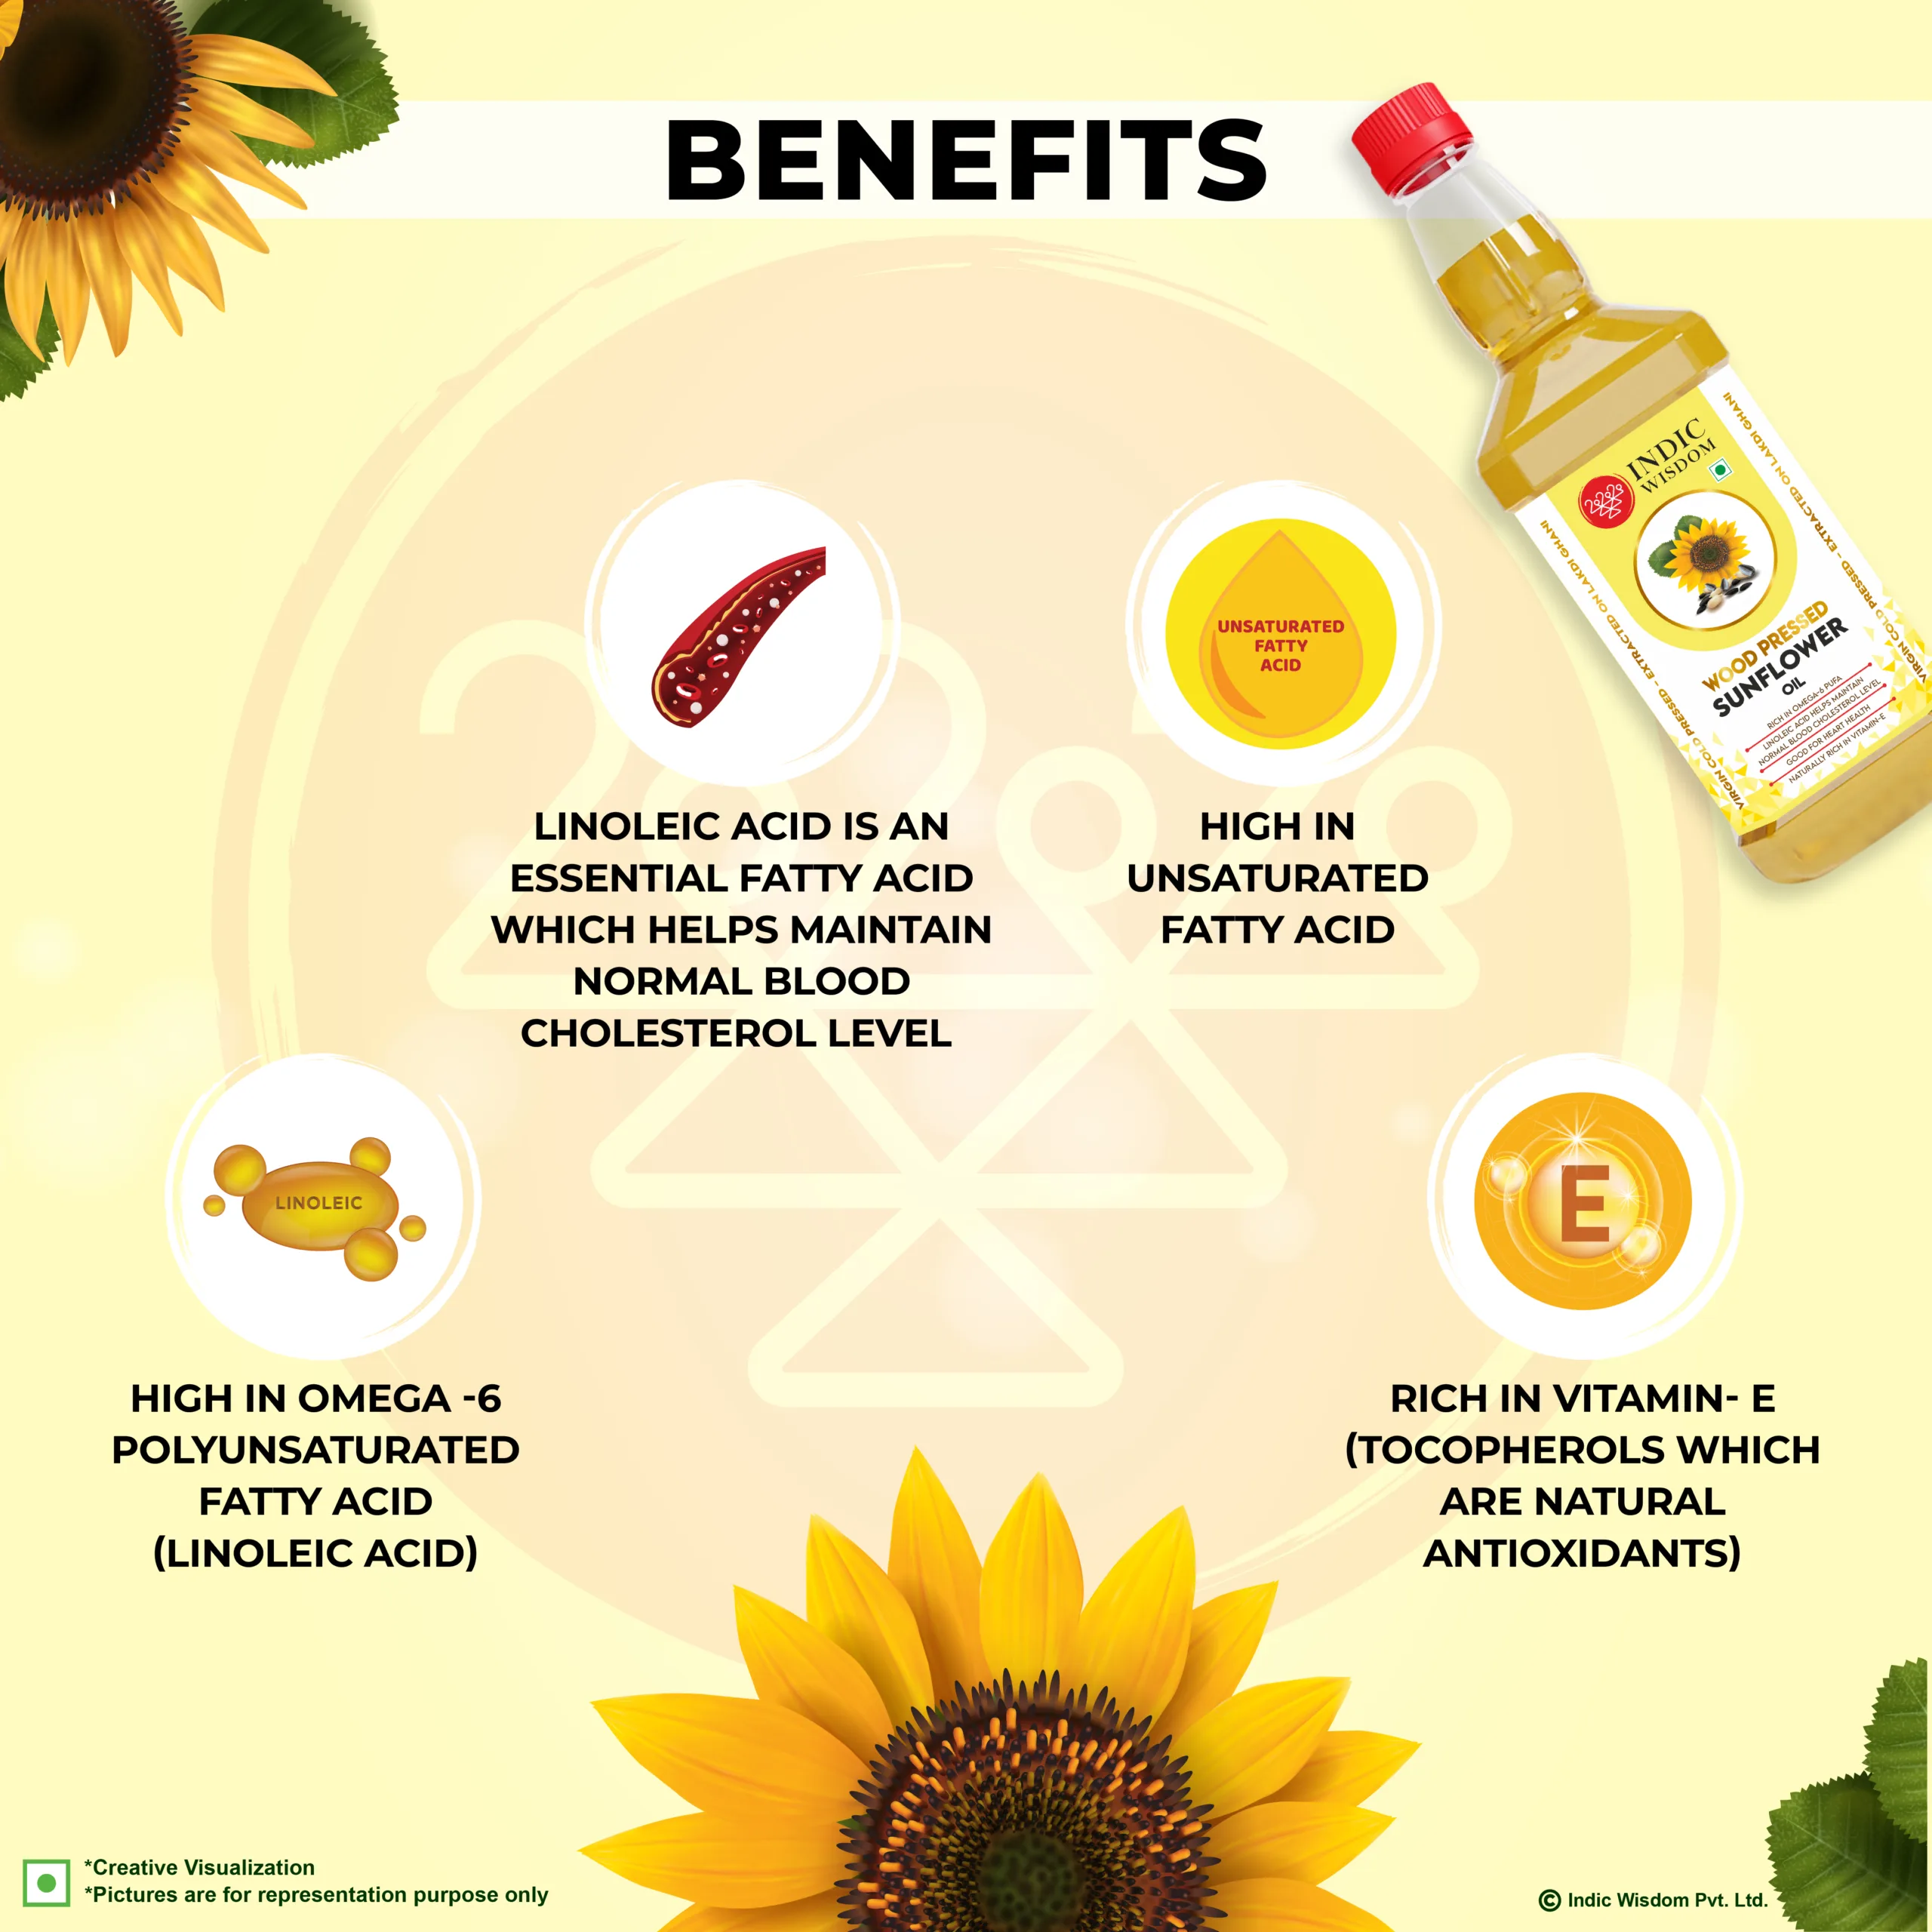 Benefits of wood pressed sunflower oil